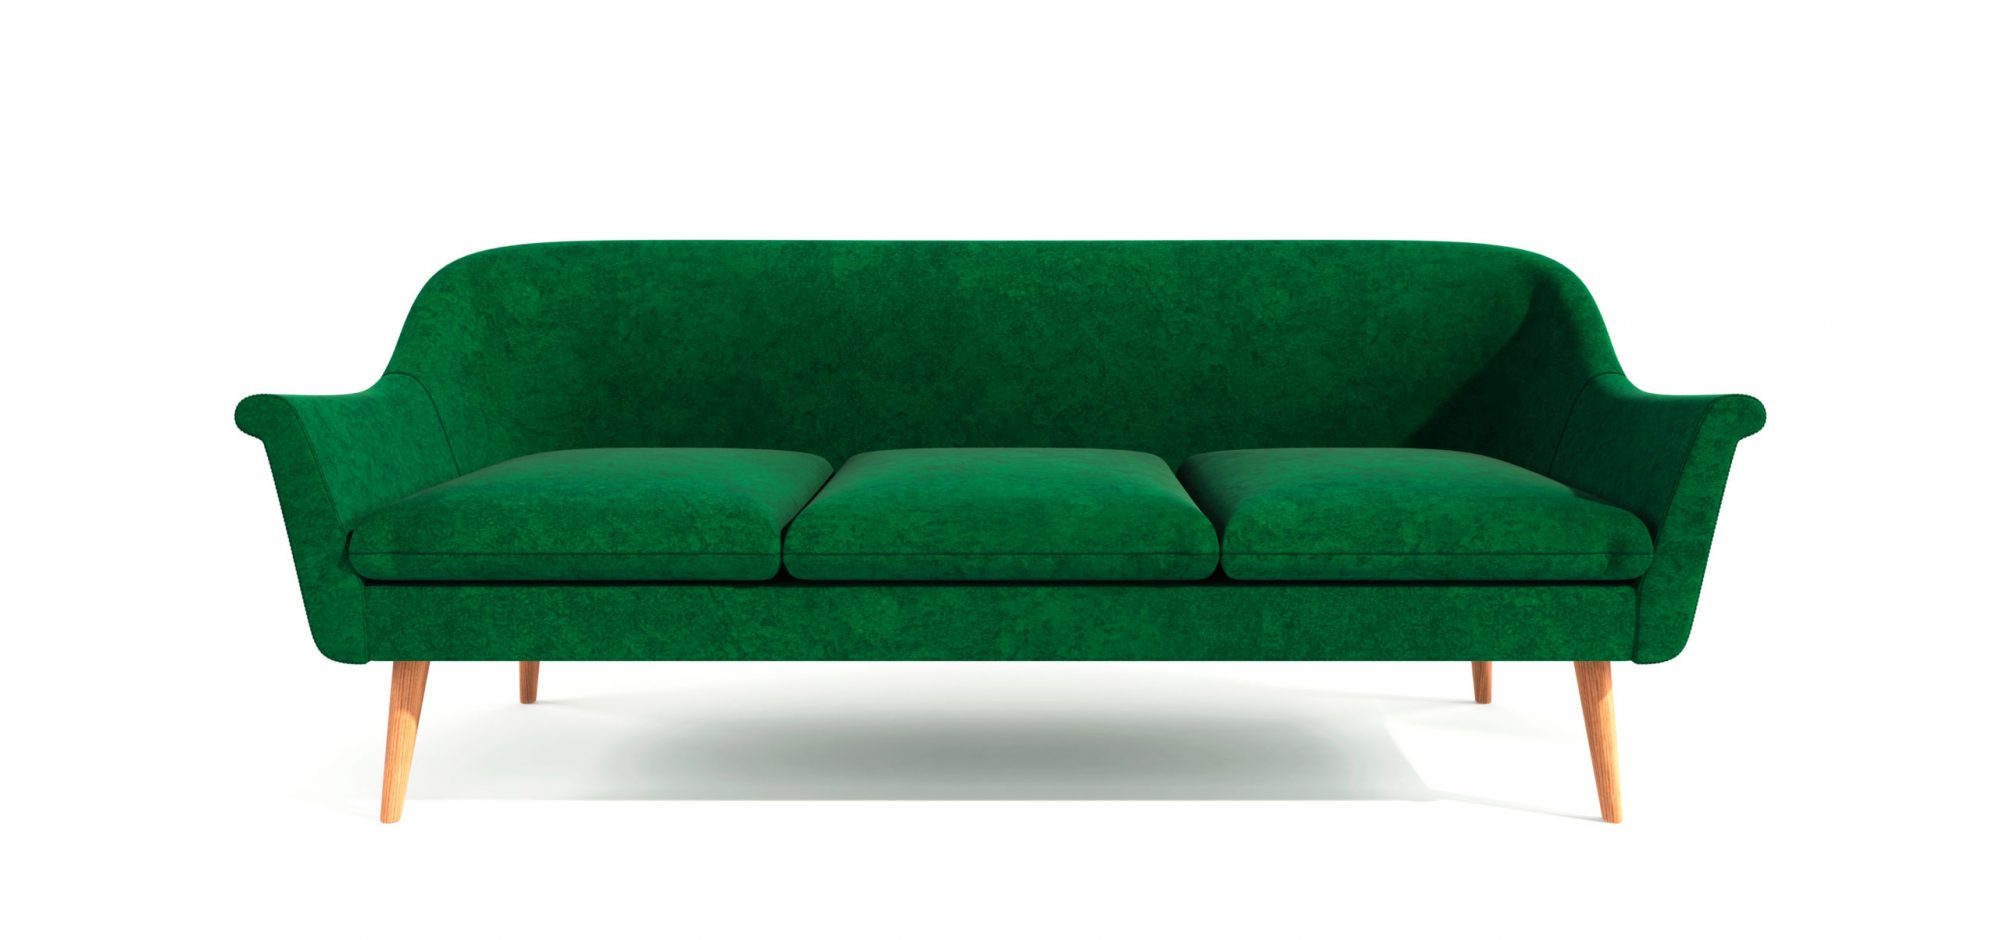 Green,Classic,Modern,Stylish,Sofa,With,Wooden,Legs,Isolated,On